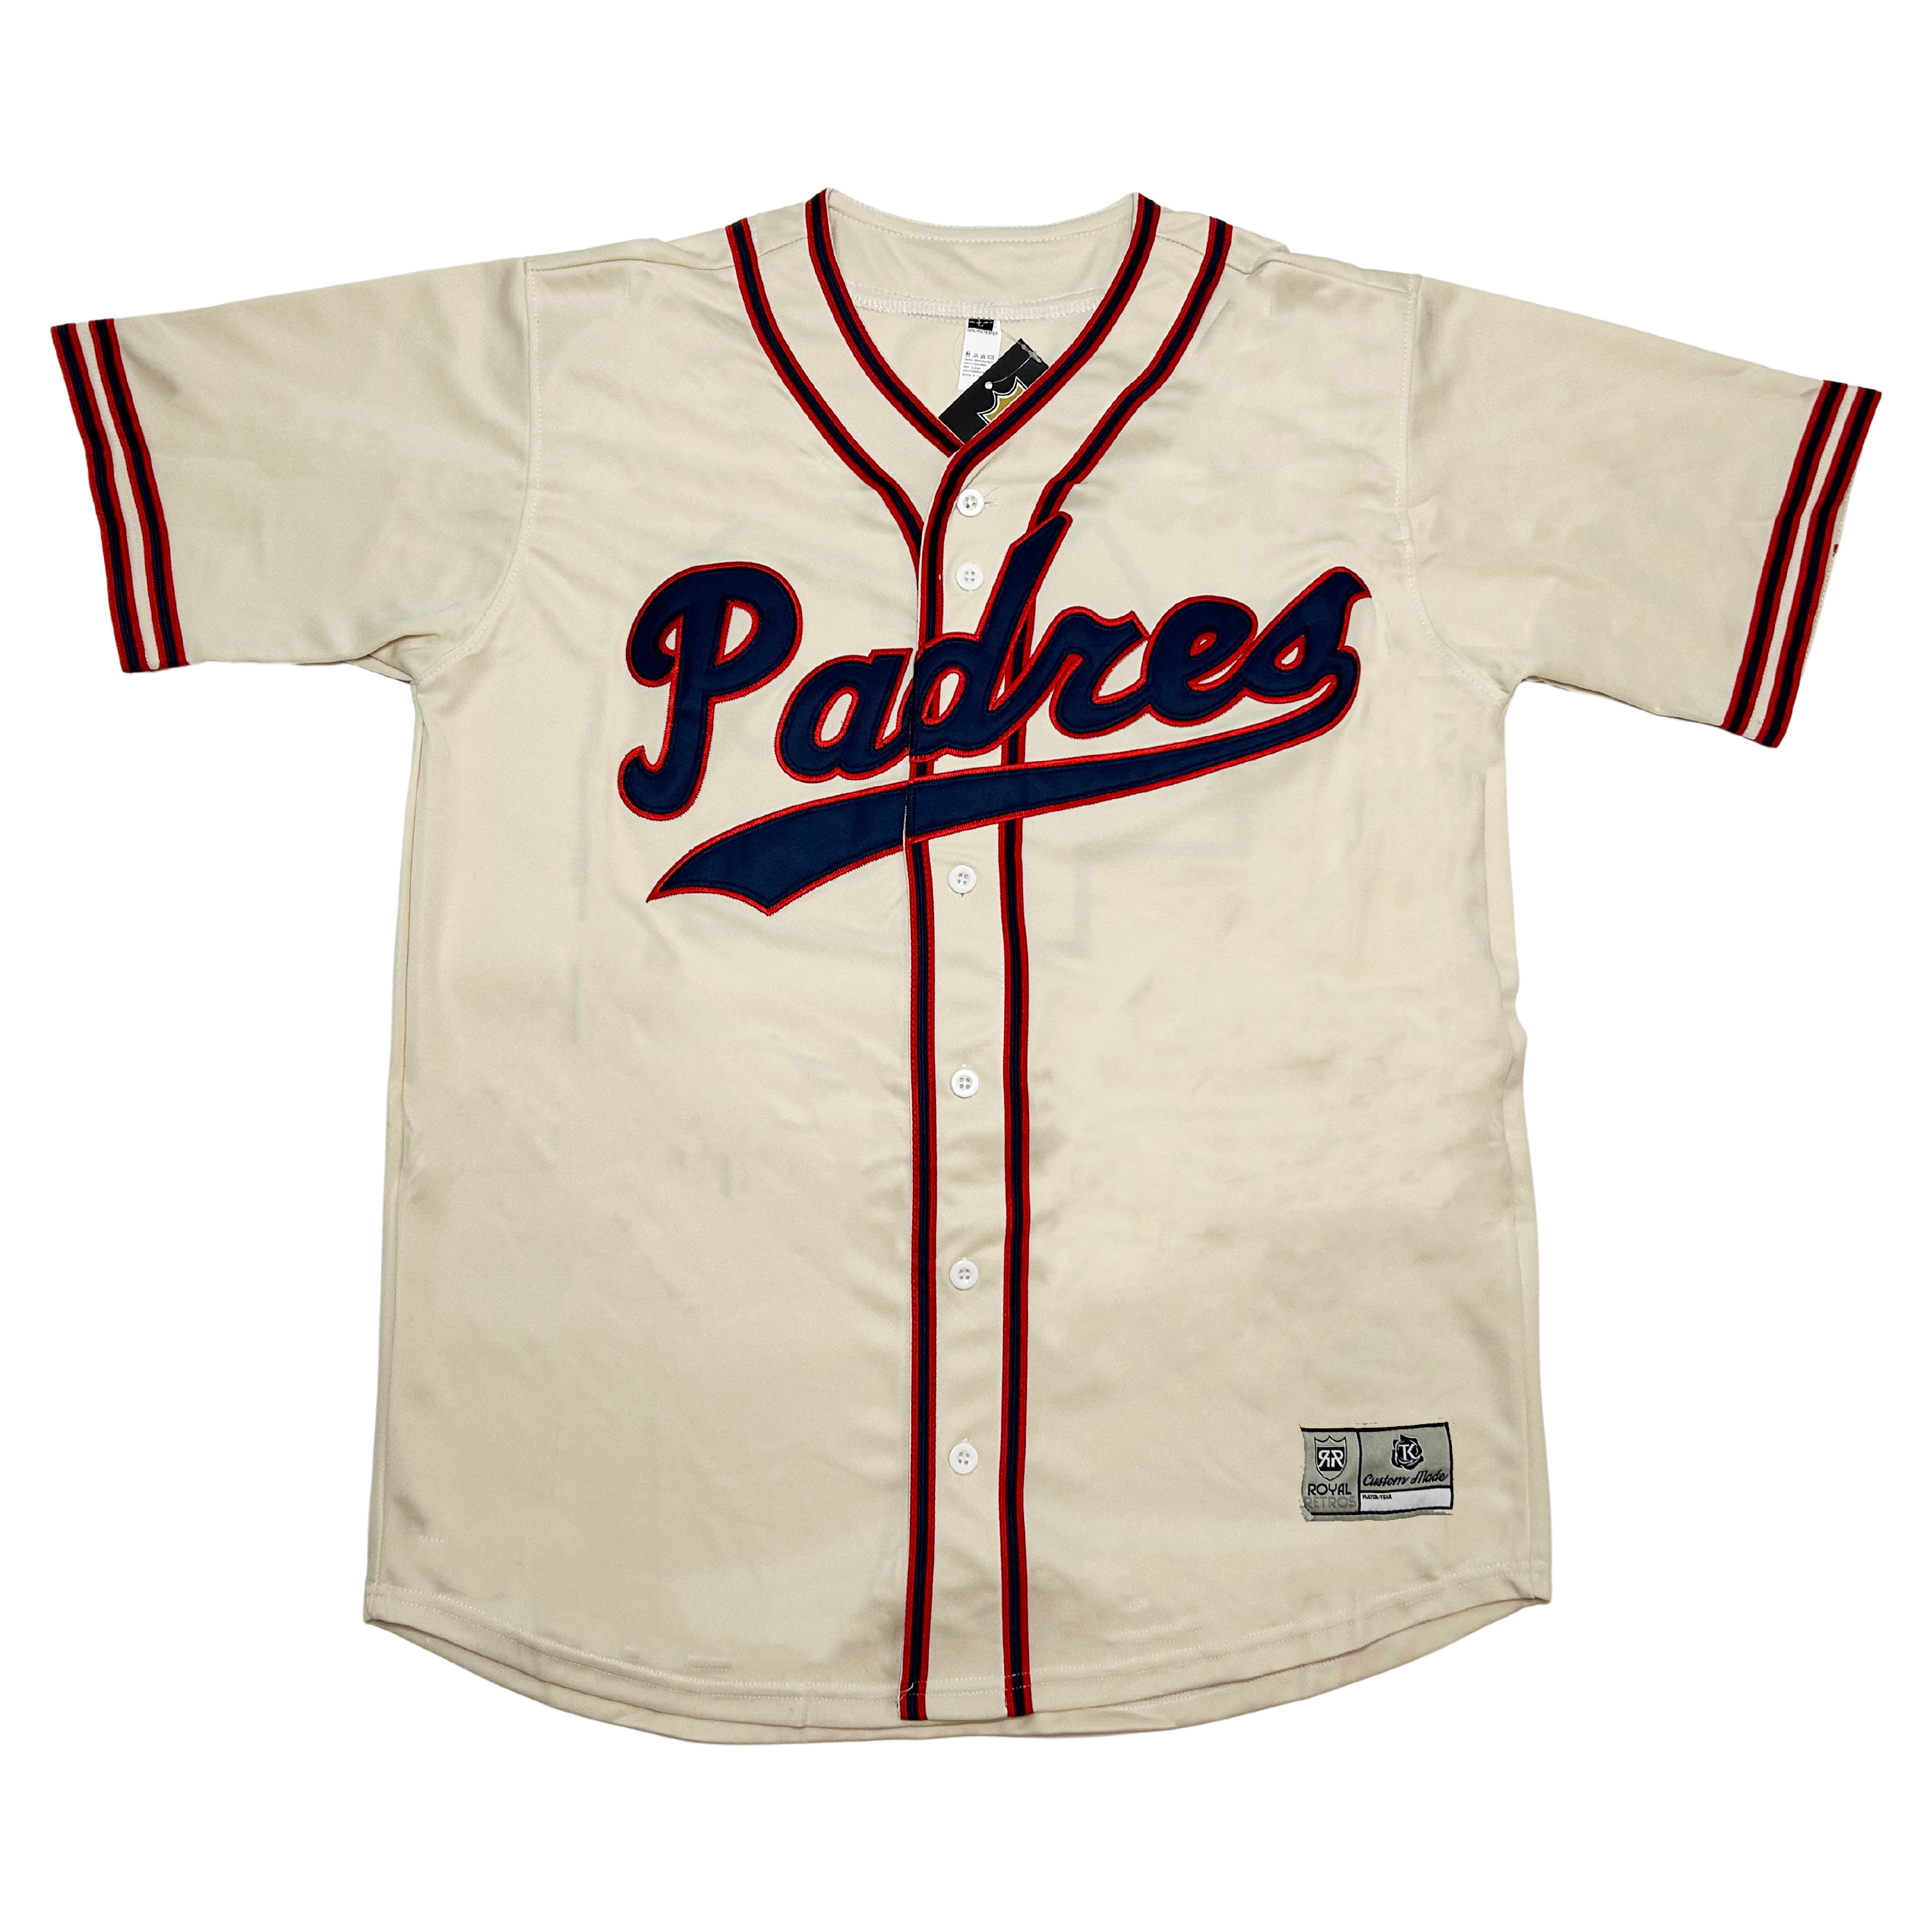 San Diego Padres Jersey History: Pacific Coast League